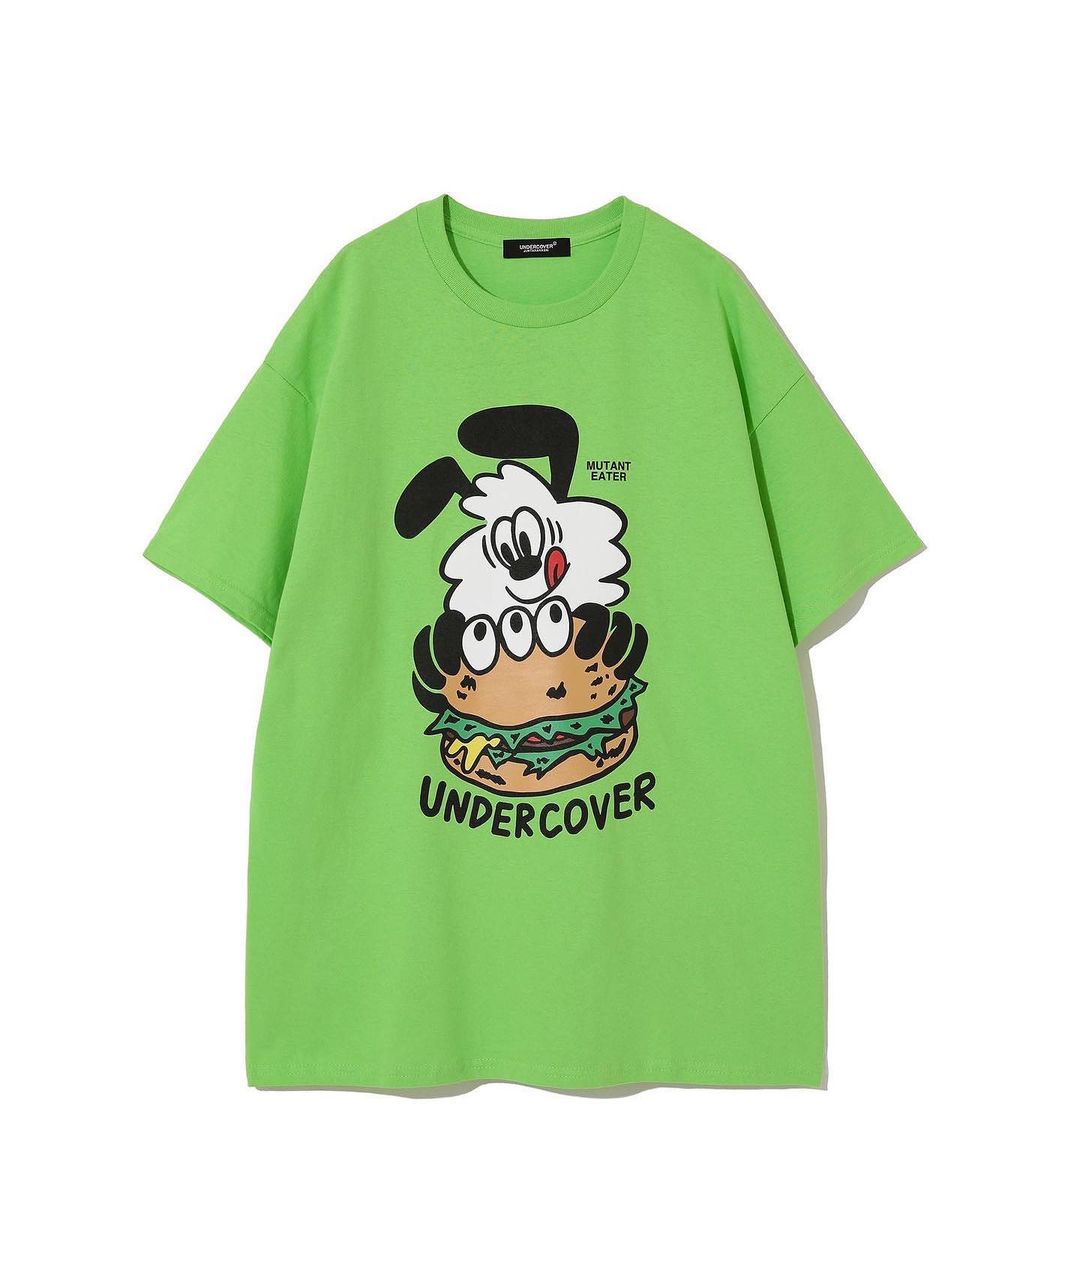 UNDERCOVER x Girls Don't Cry コラボアイテムがCOMPLEXCON 2022にて 